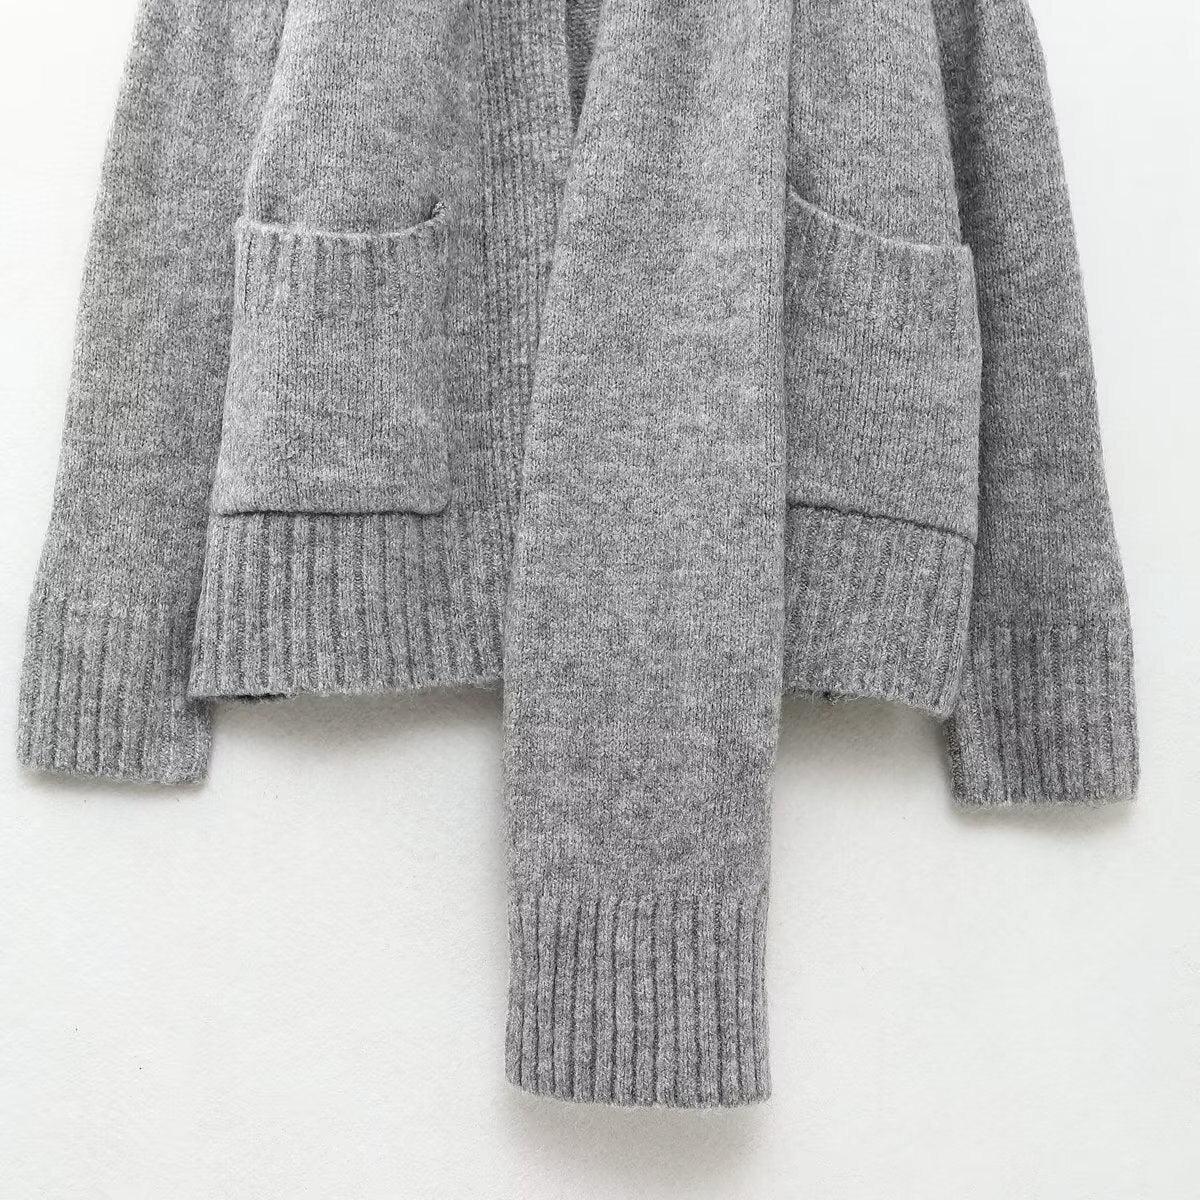 Knitted Scarf Sweater - Kelly Obi New York